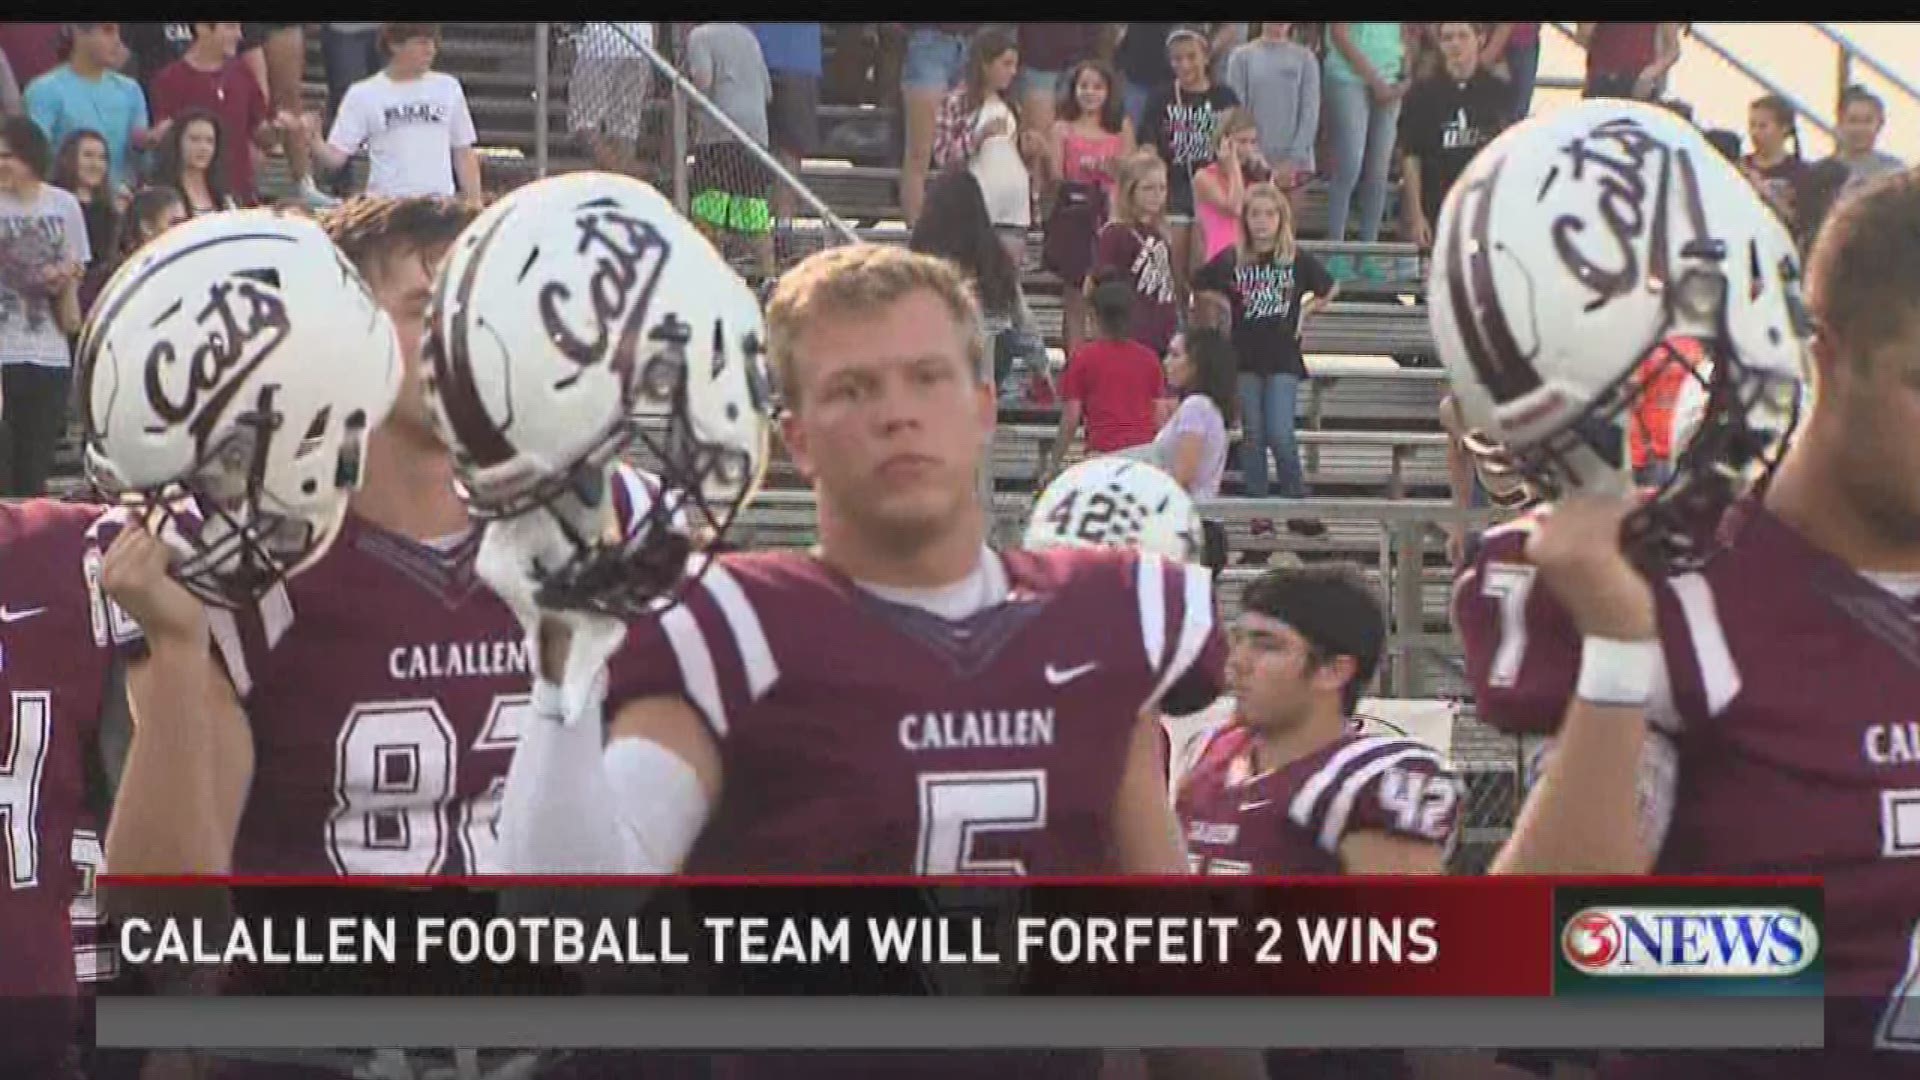 Calallen football team will forfeit wins vs. Carroll and King after using an ineligible player. 30-5A executive committee votes 6-4 against an eligibility waiver.